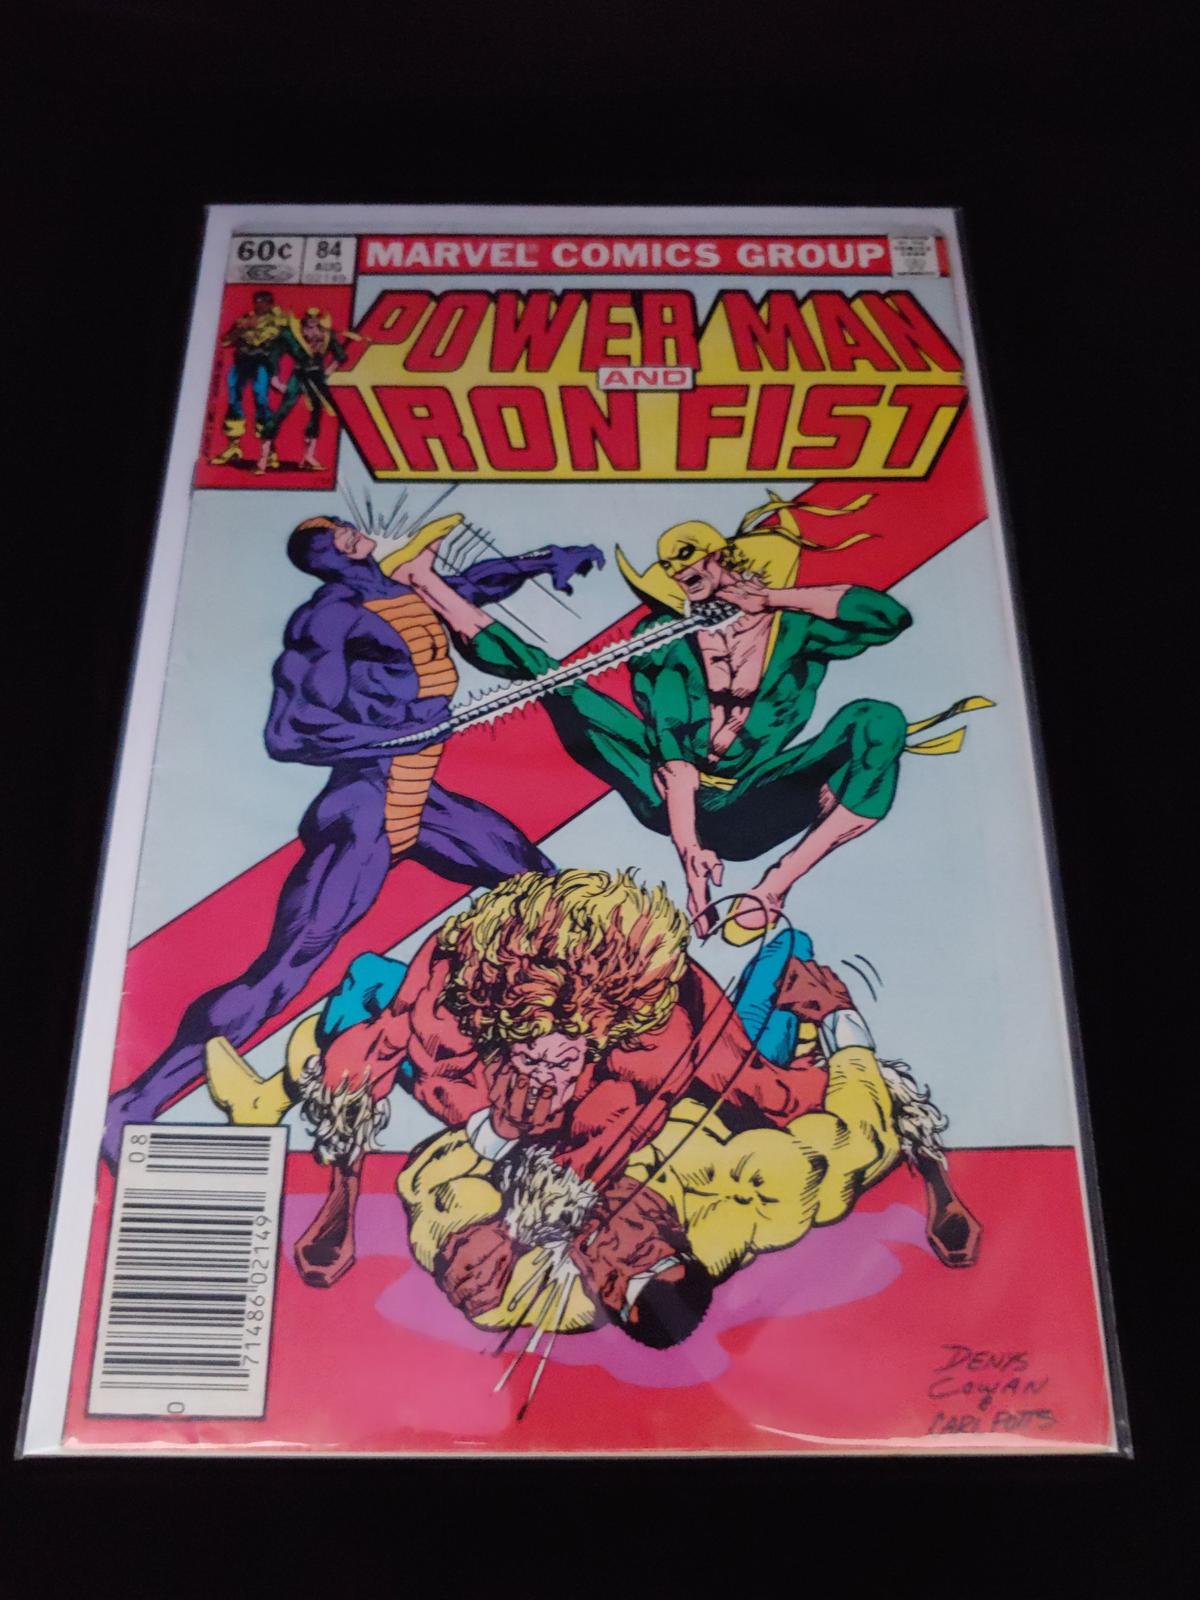 POWER MAN AND IRON FIST #84